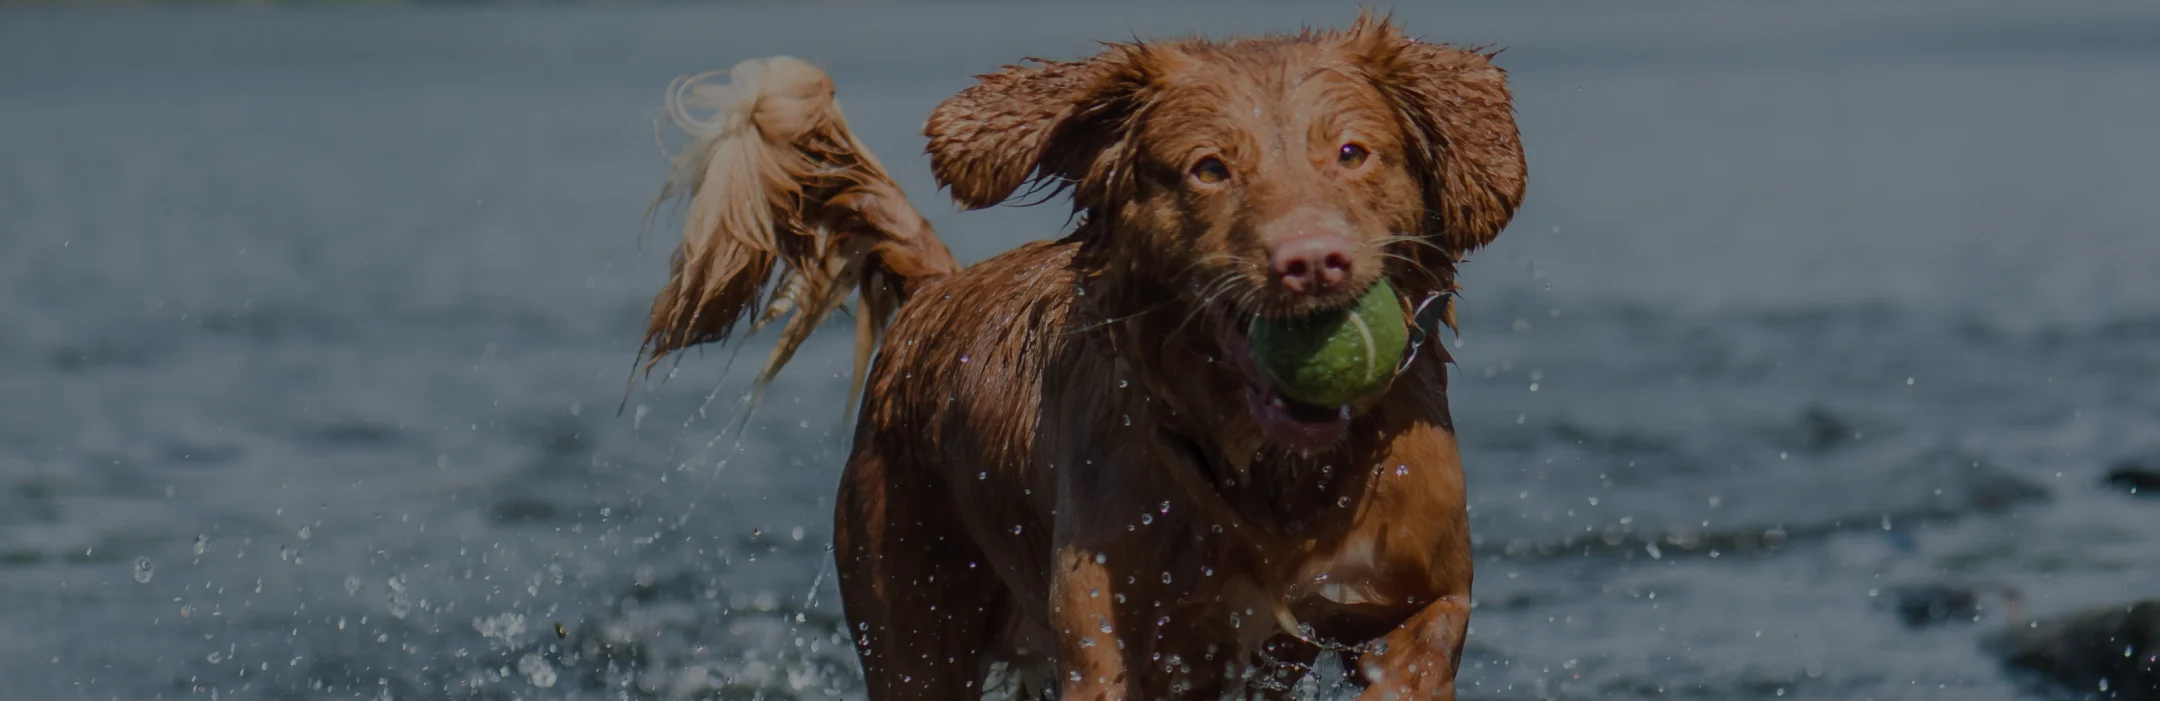 Reddish dog dog with tennis ball in mouth playing in body of water